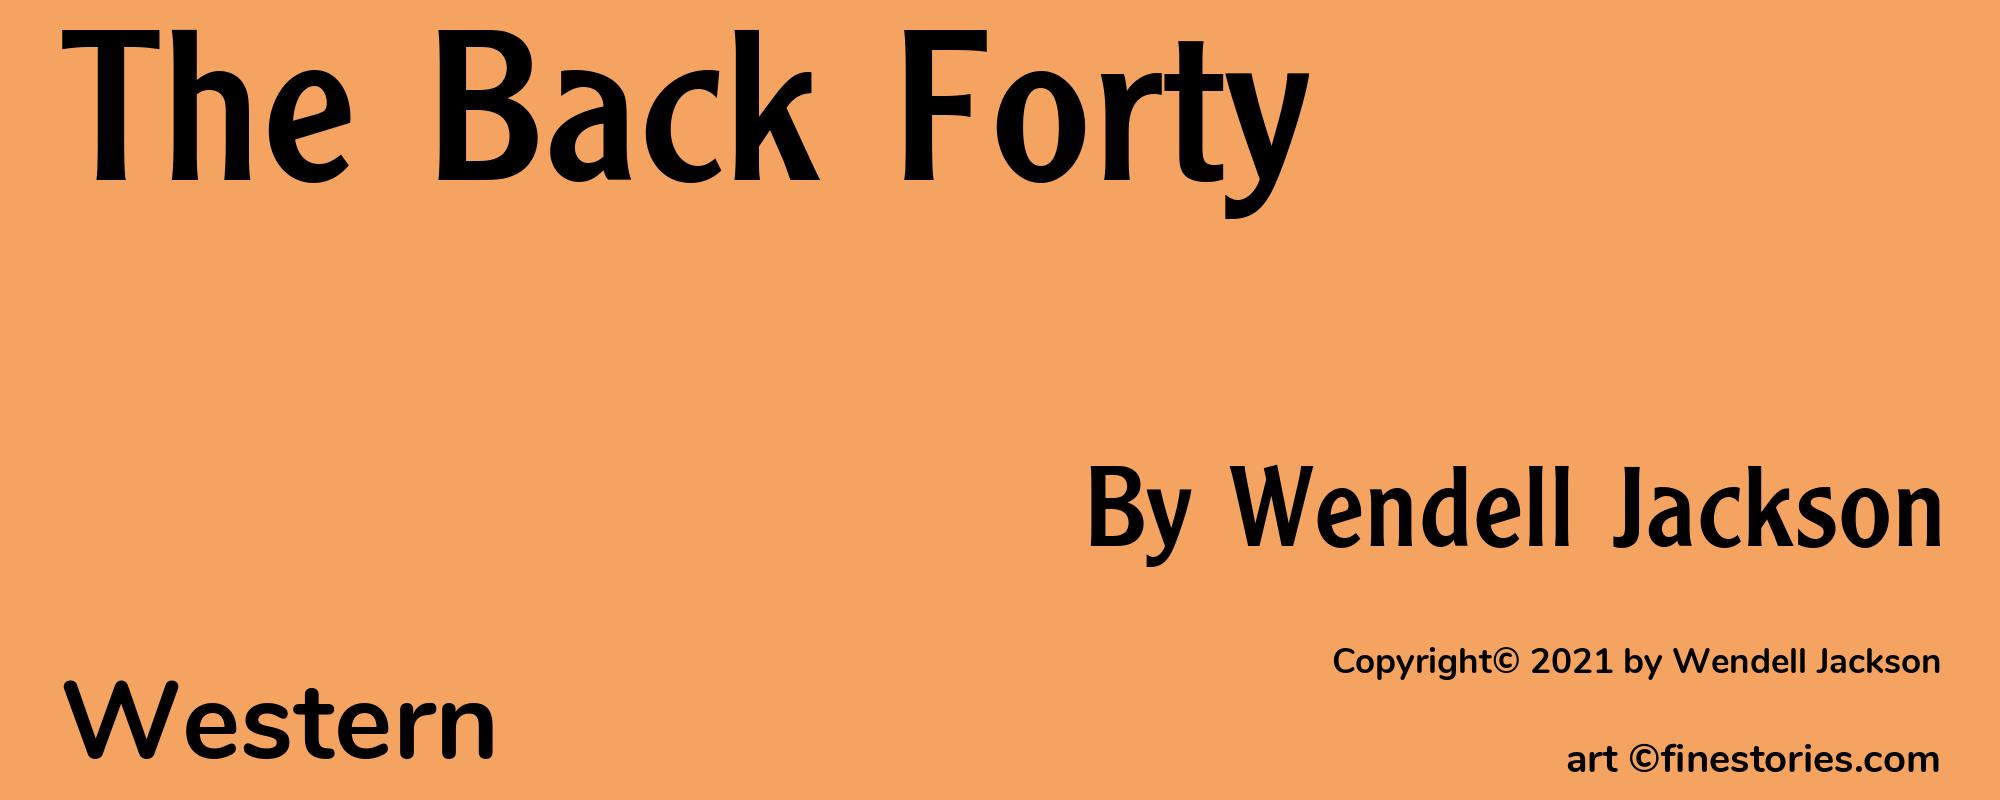 The Back Forty - Cover